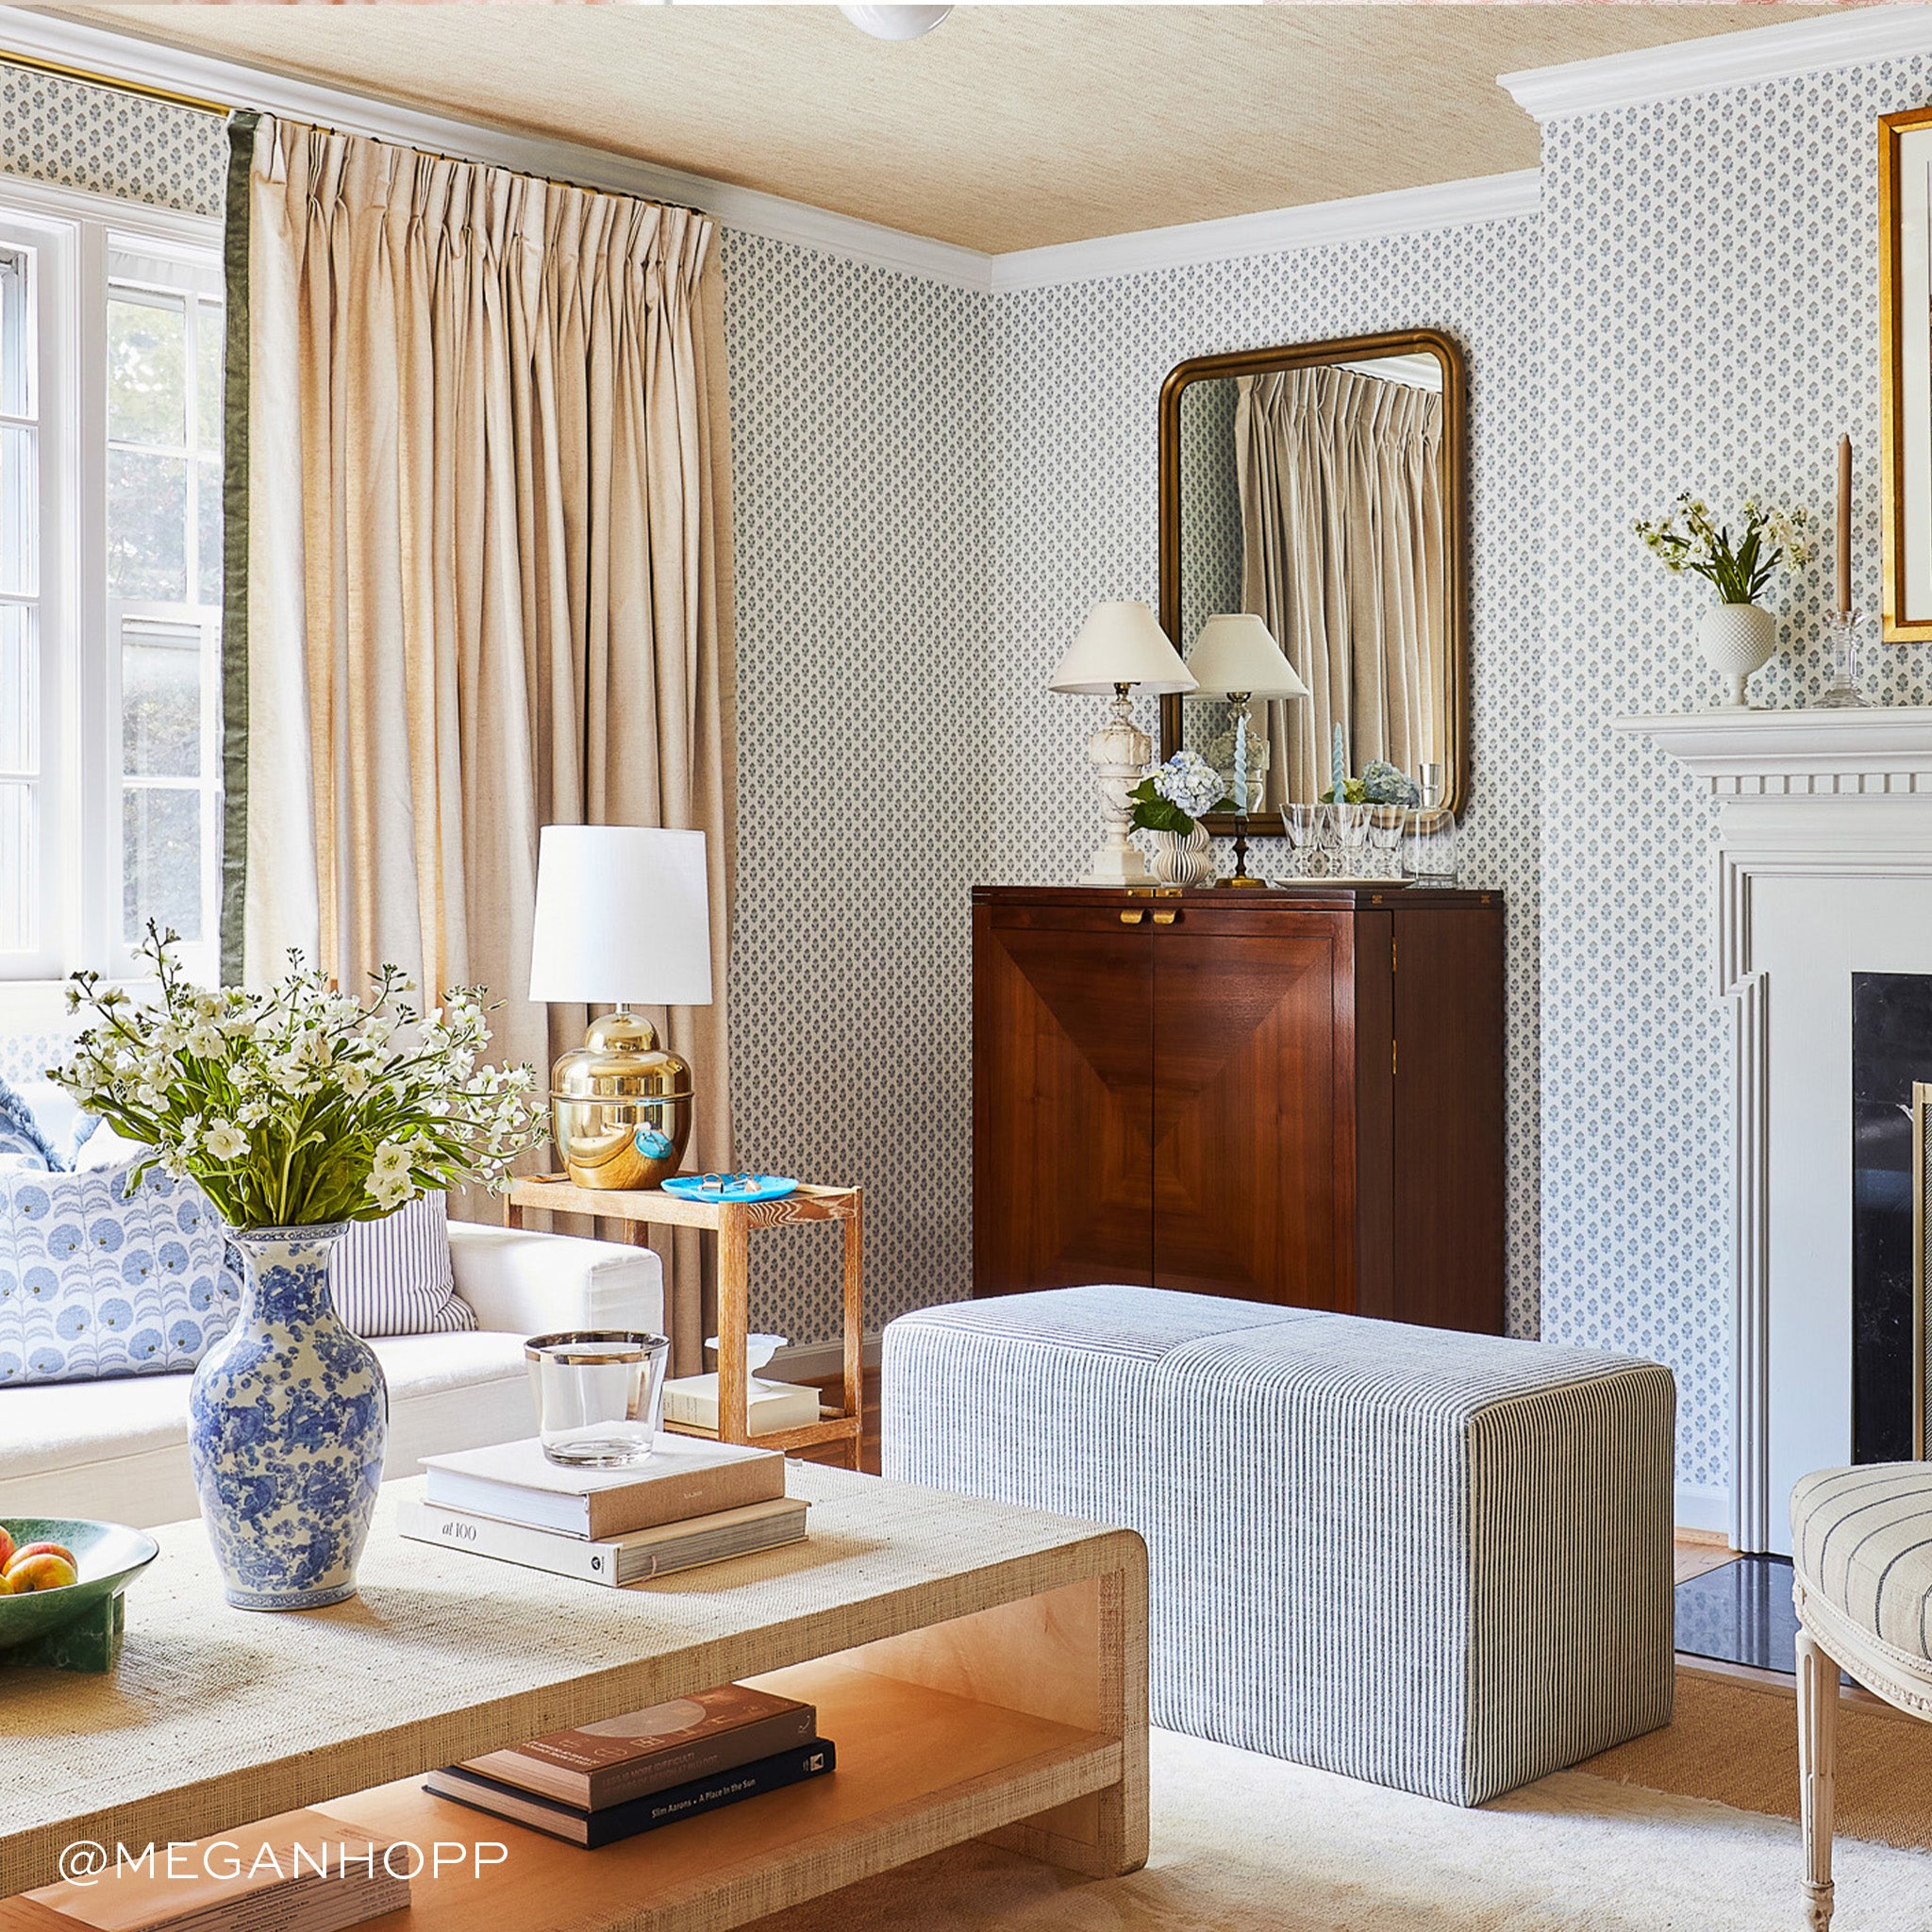 Living room styled with Linen Oat Curtains with Fern Green Velvet Band next to white couch with blue and white pillows by wooden coffee table with white flowers on blue and white vase next to stacked books. Photo taken by Megan Hopp